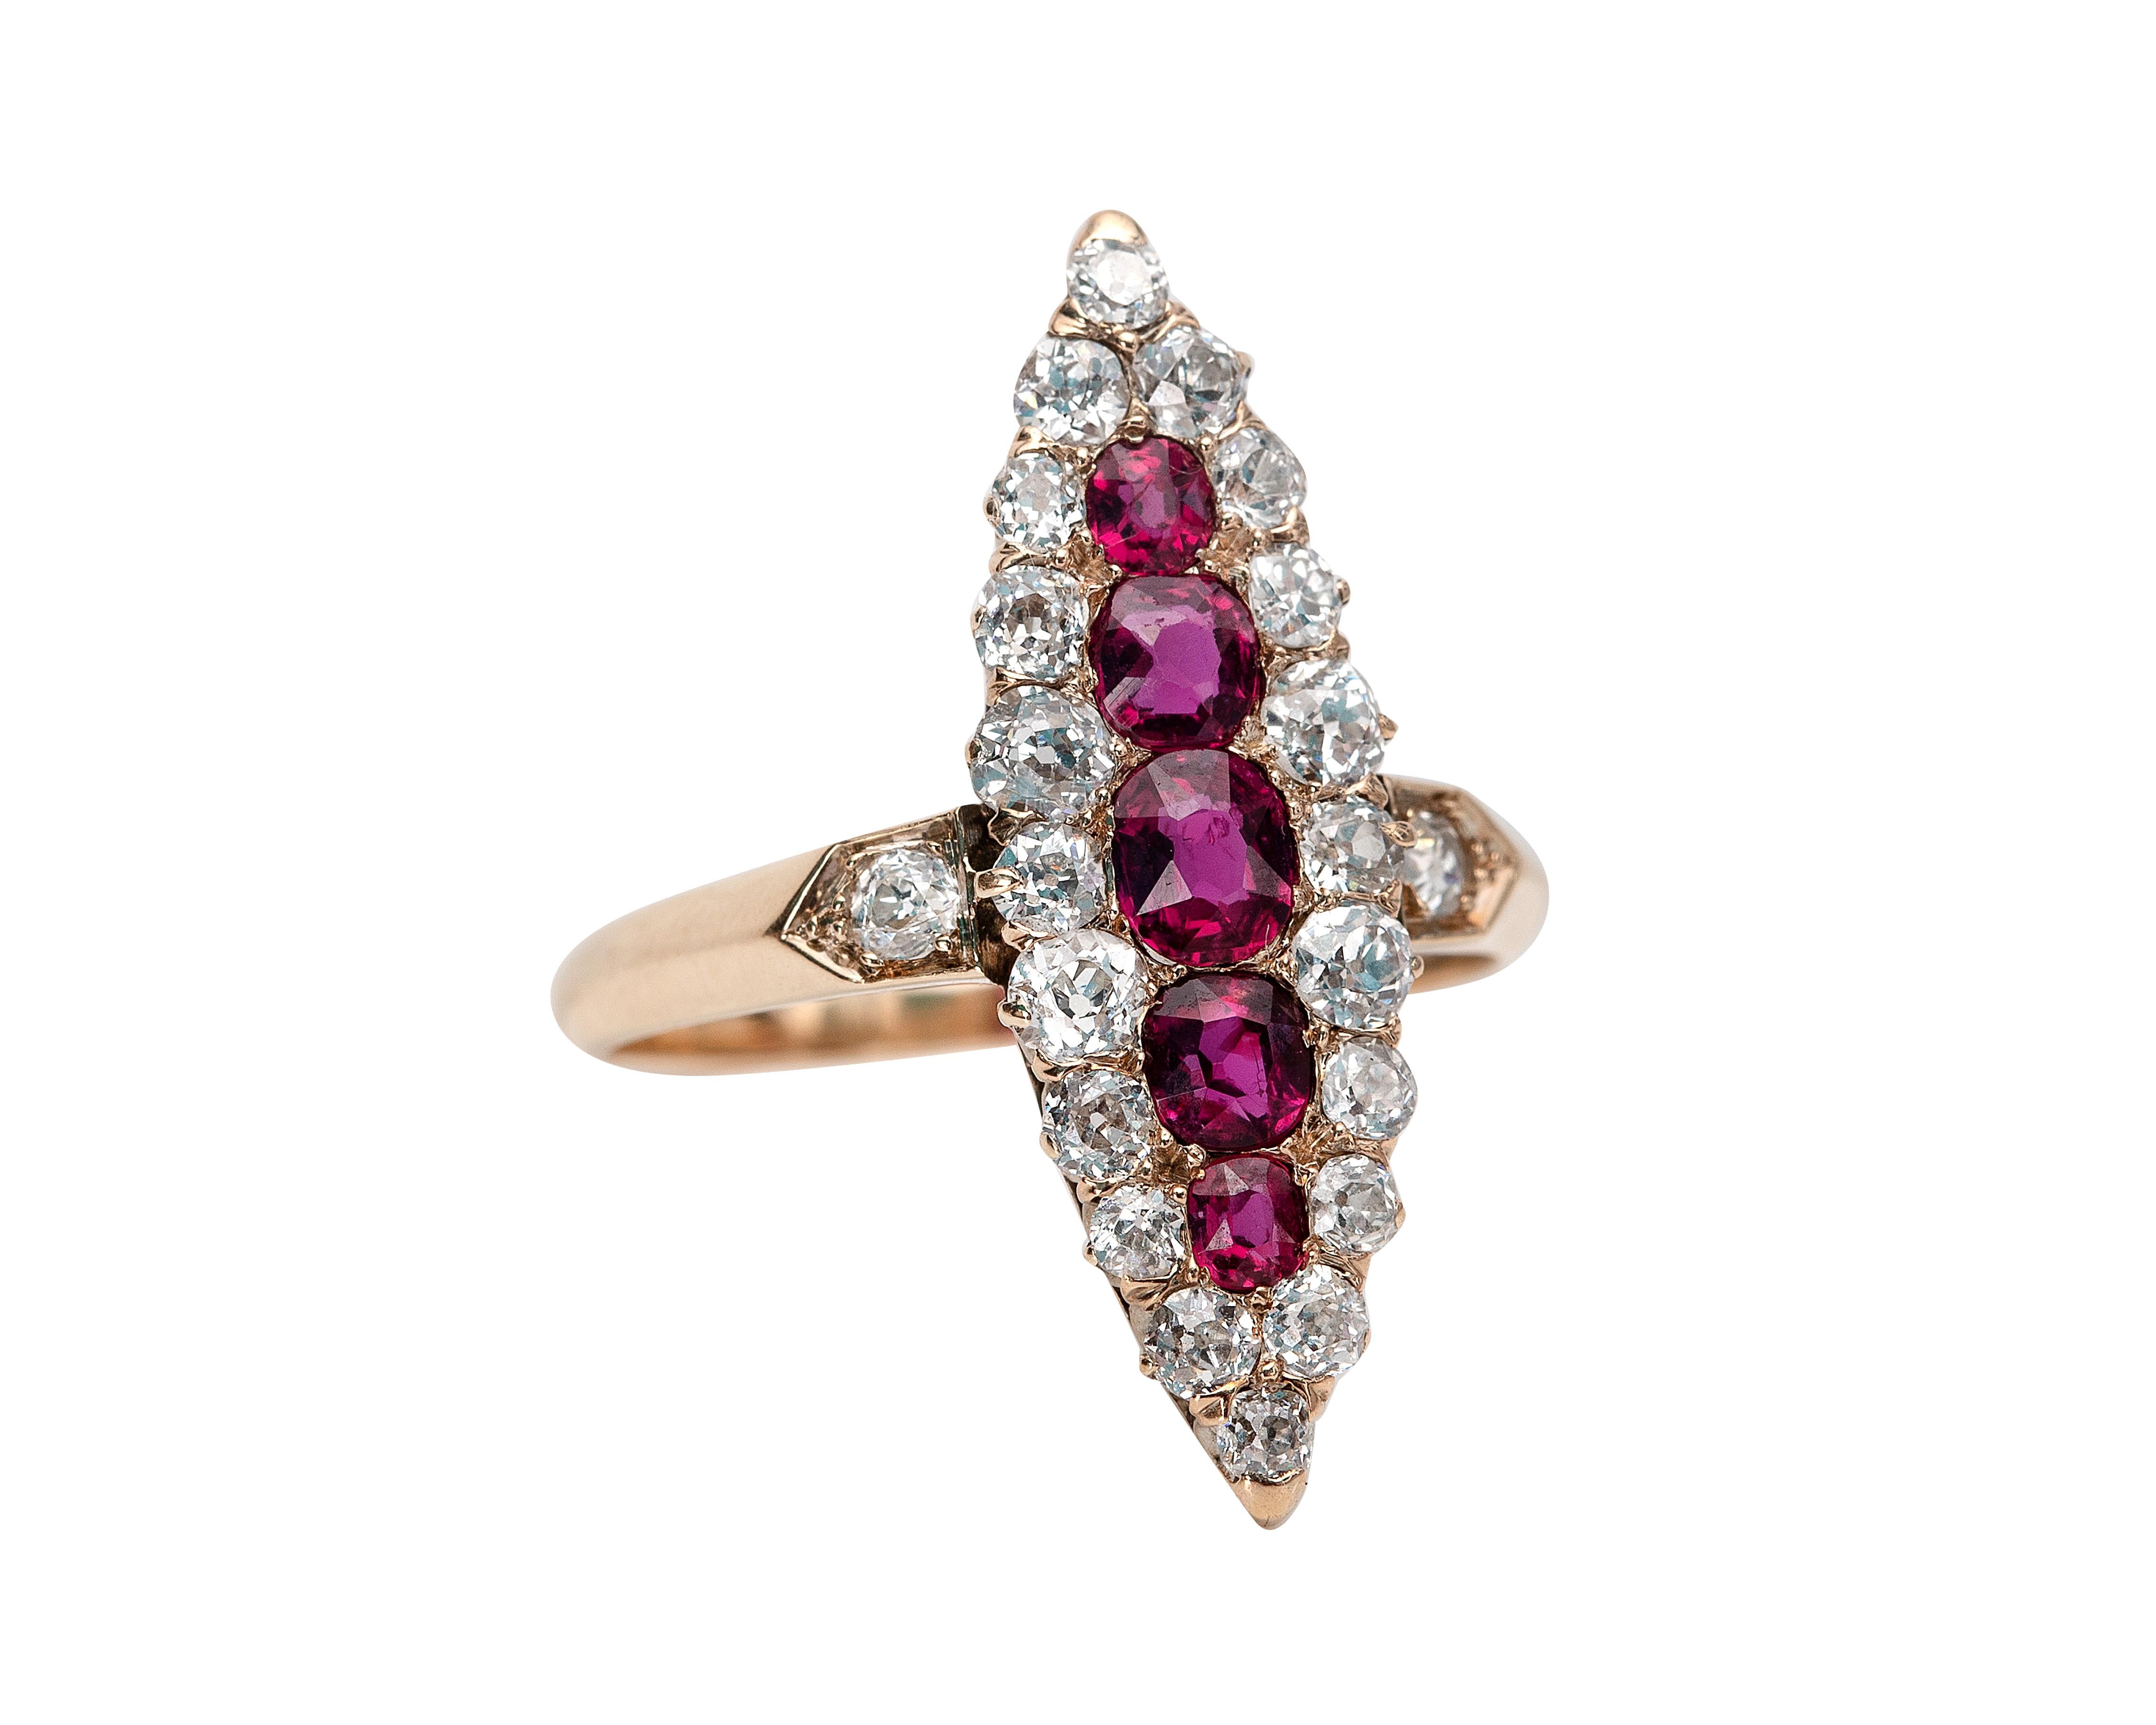 This is an exquisite example of a victorian navette marquise-shaped ring. It is crafted in yellow gold and the center features 5 pigeon blood red rubies of the finest quality. The rubies are surrounded by 1 carat of impeccable old miner cut